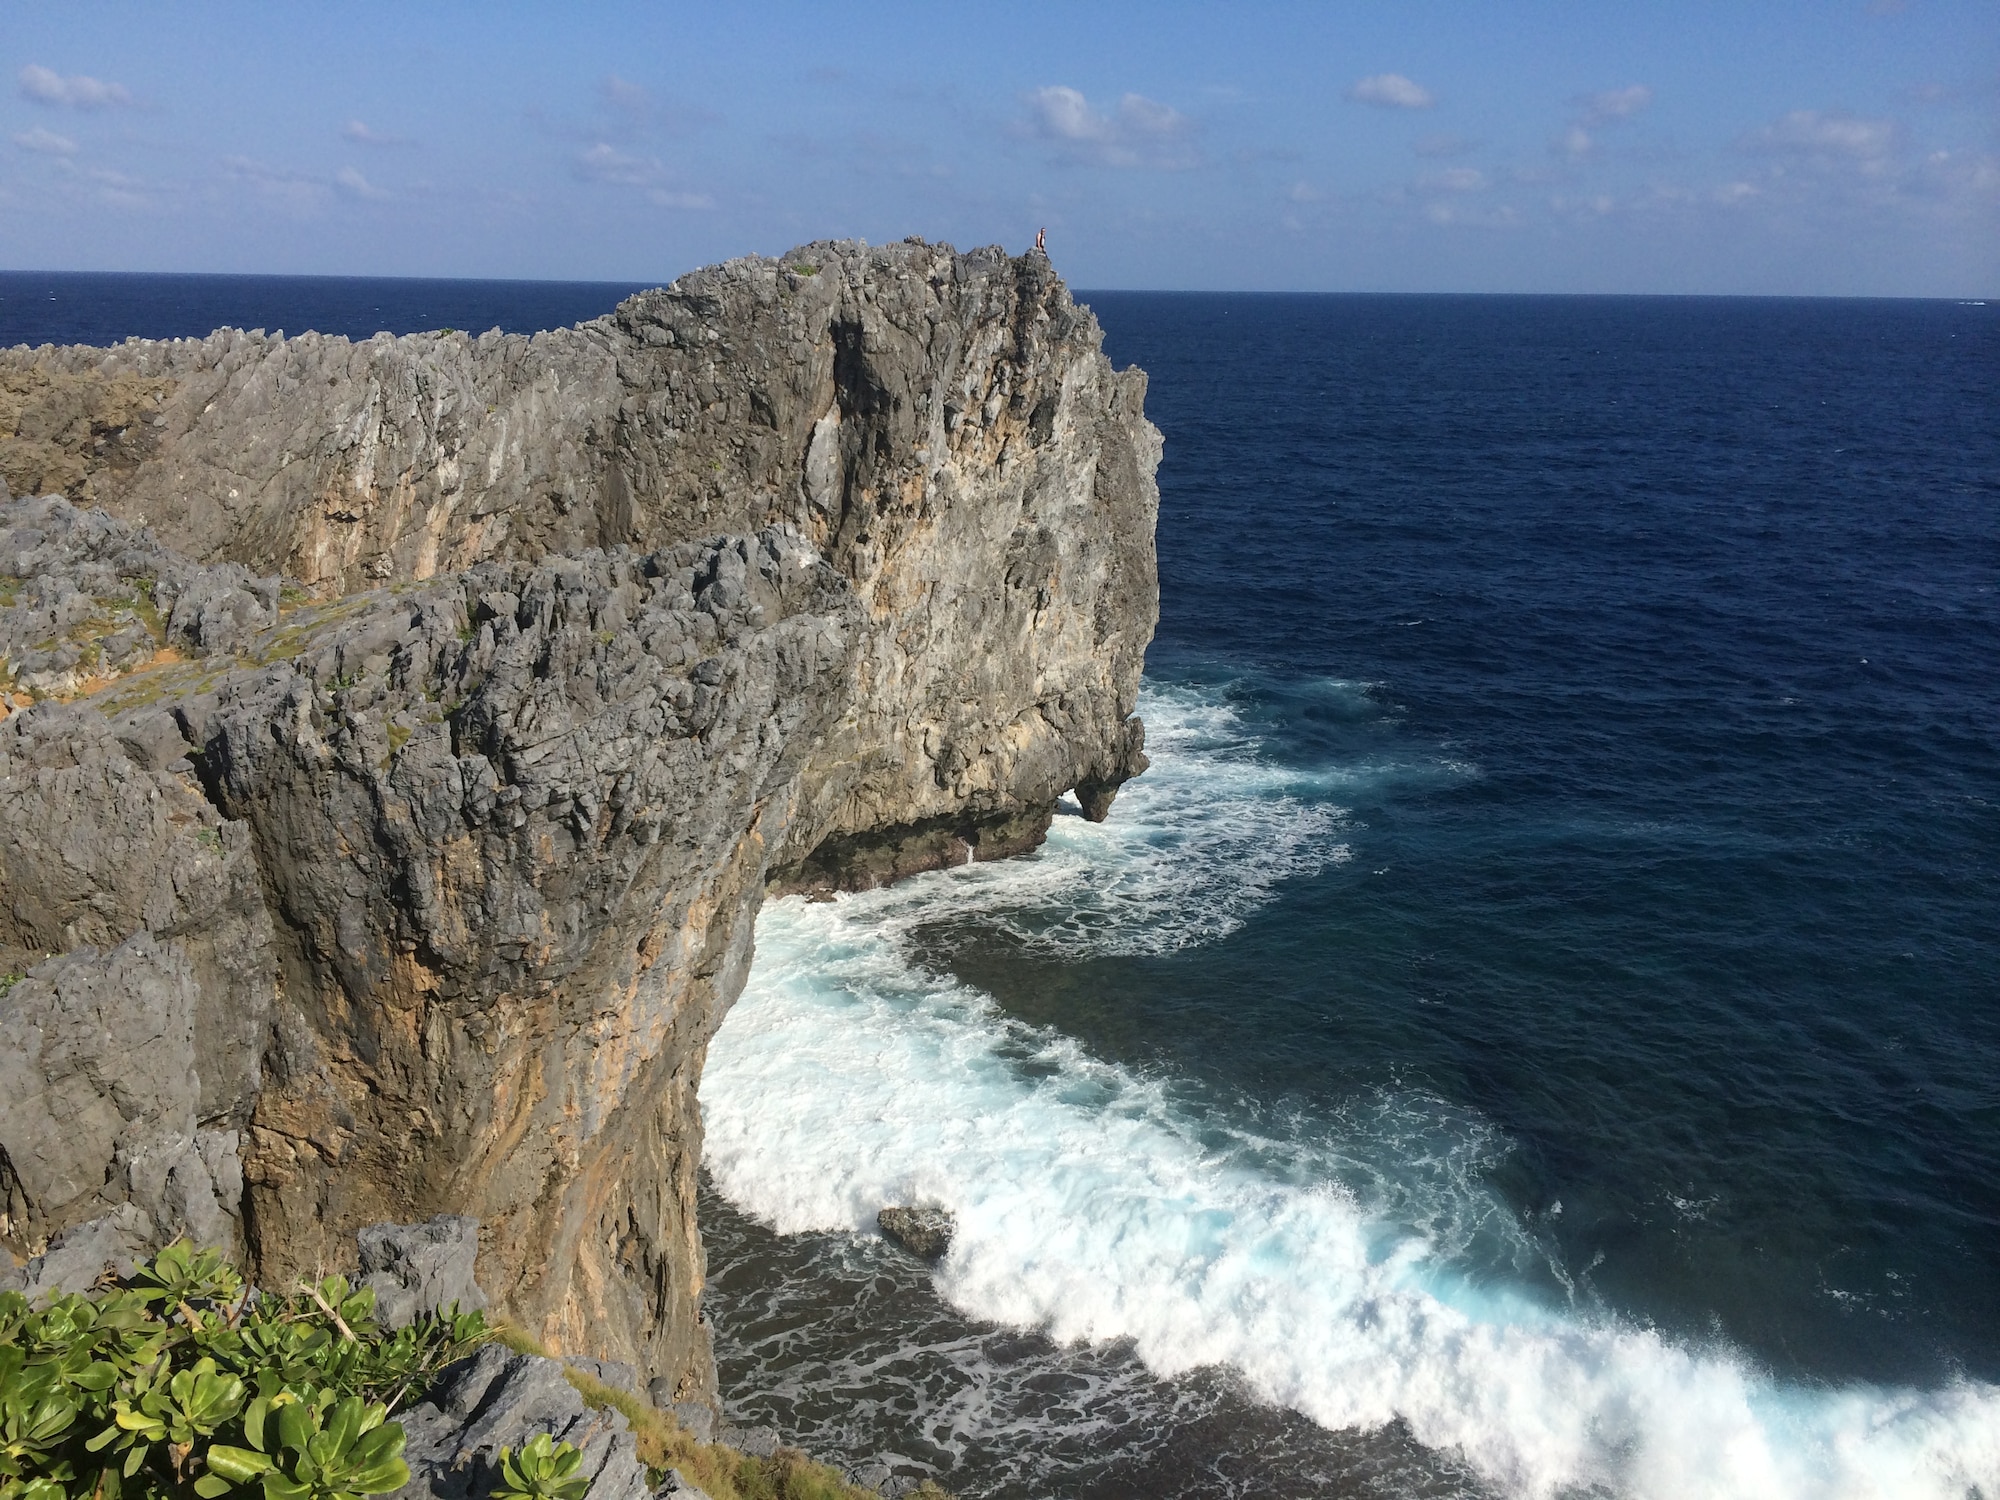 Waves crash against the 200-foot cliffs at Hedo Point, the northern-most spot on Okinawa, on Oct. 18, 2015. The point is a popular tourist destination, and makes for a good day trip from Kadena Air Base. (U.S. Air Force photo by Tim Flack)